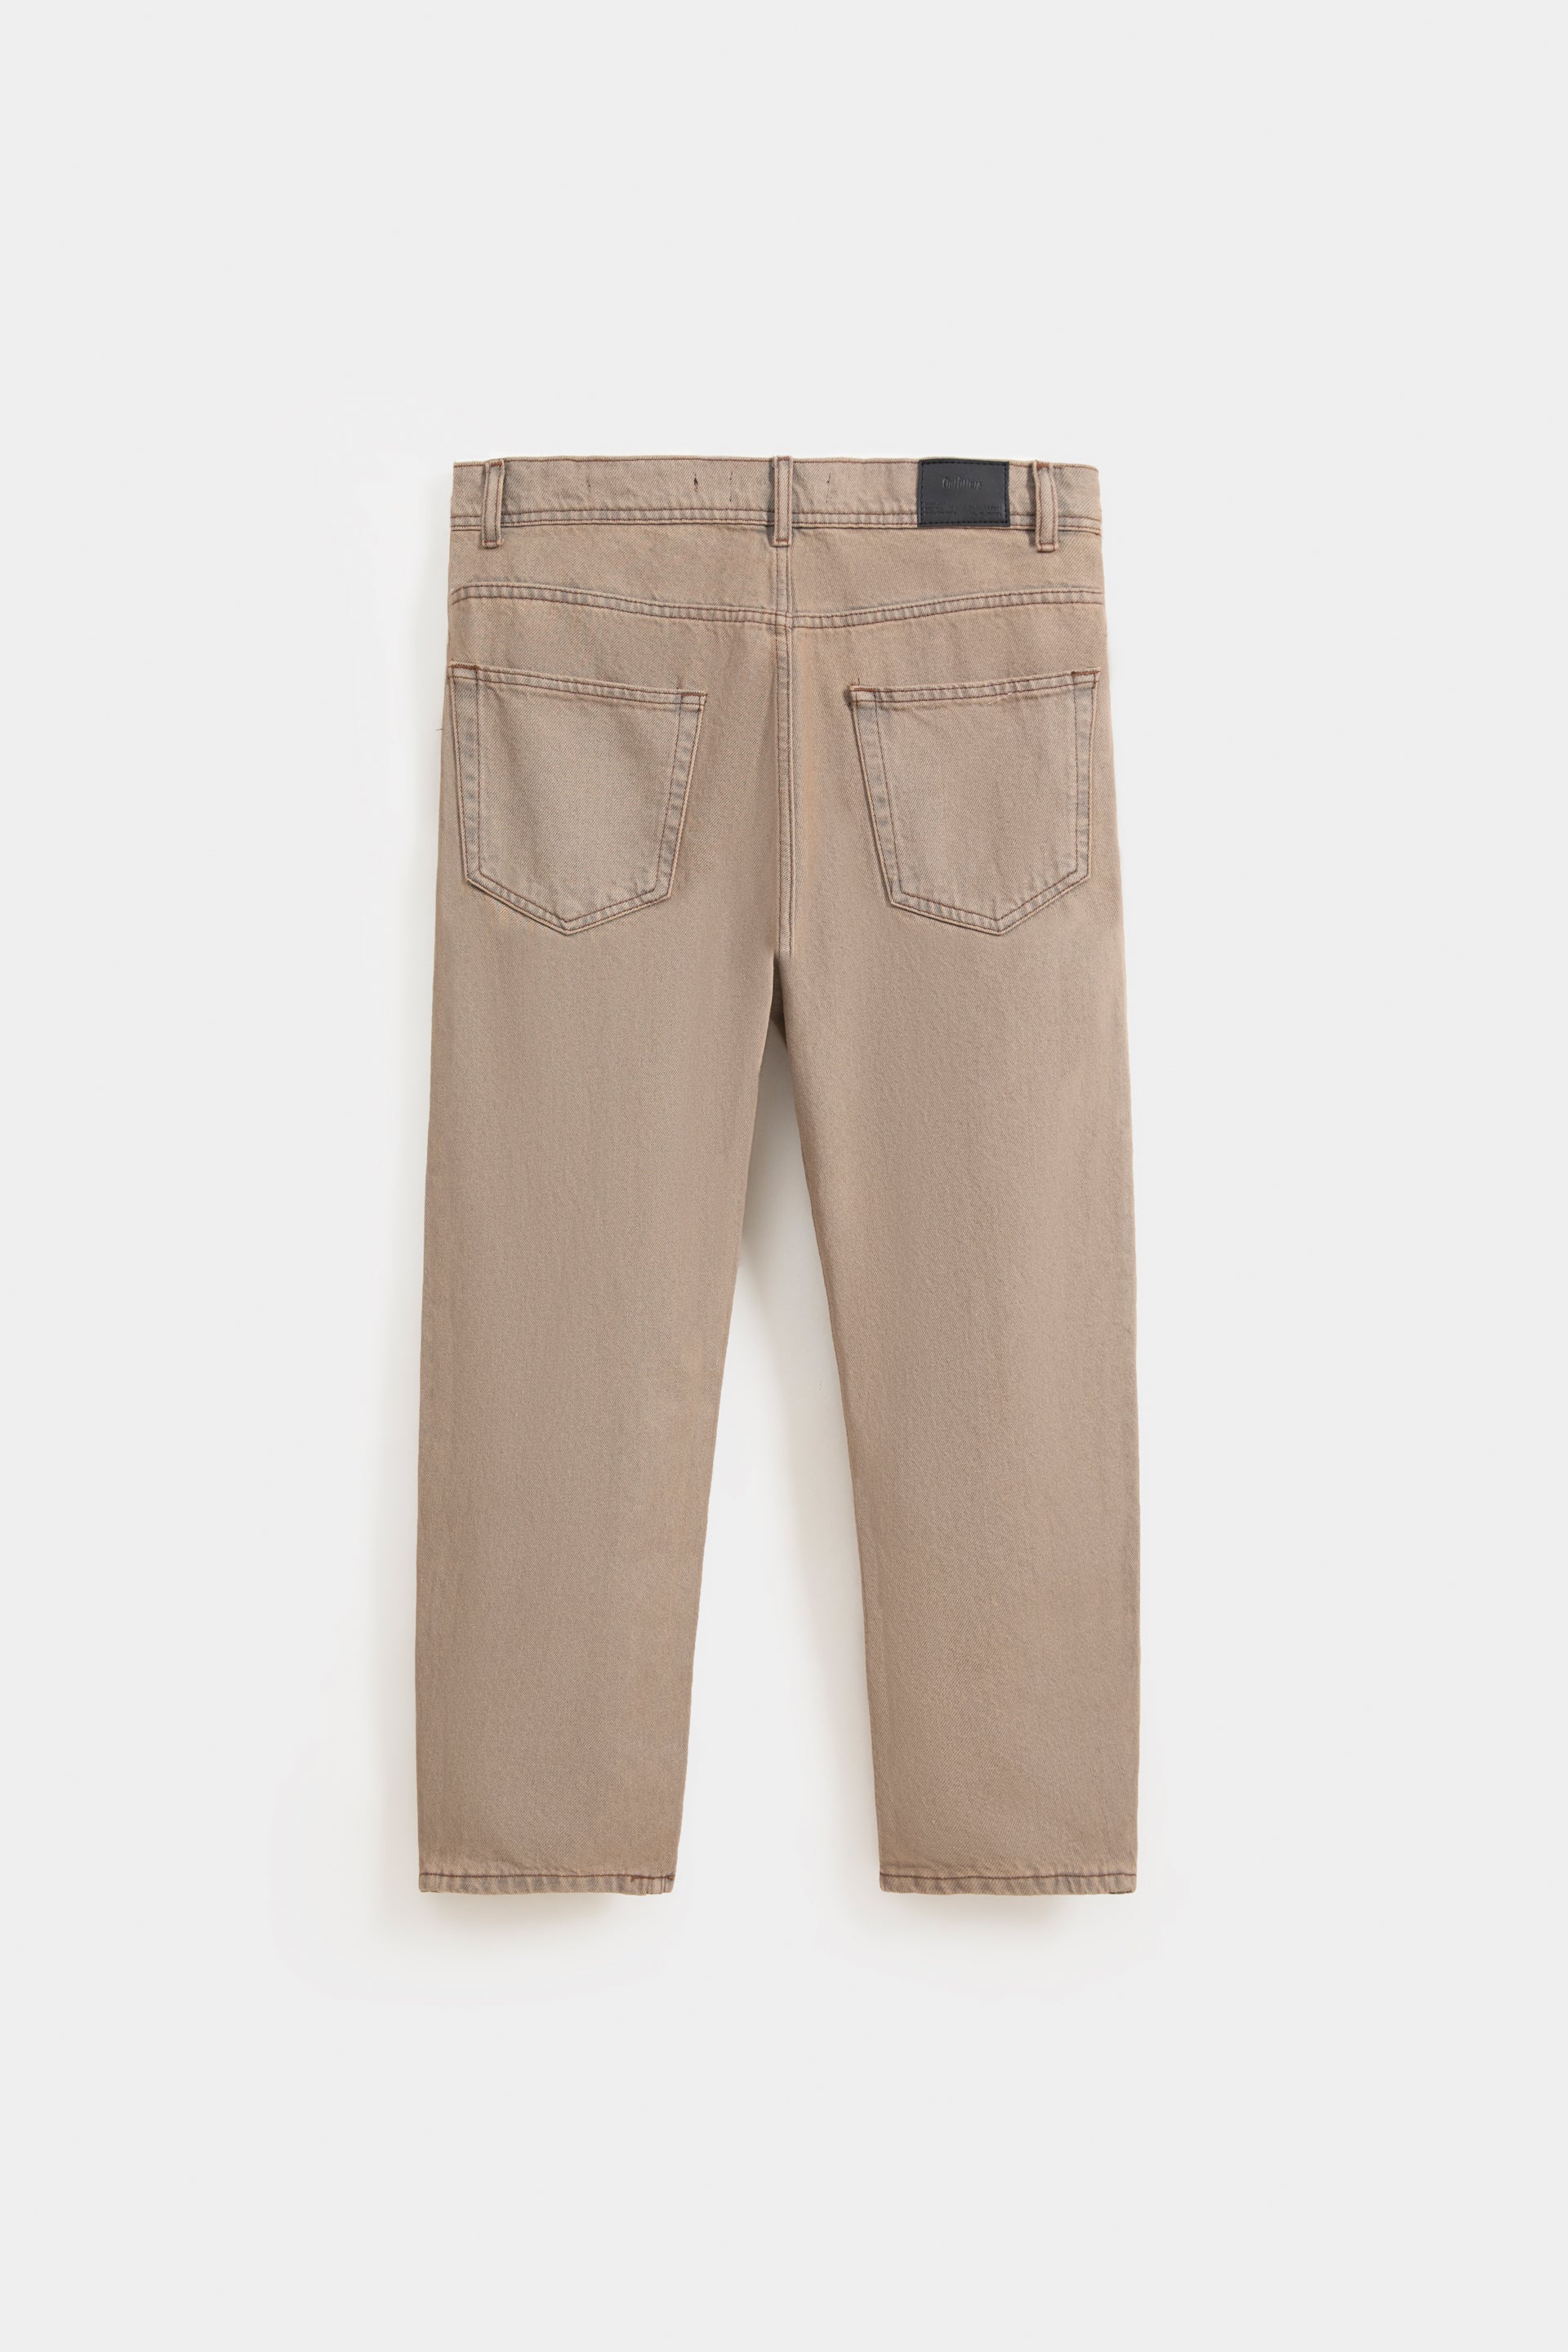 Loose Relaxed Cotton Pants